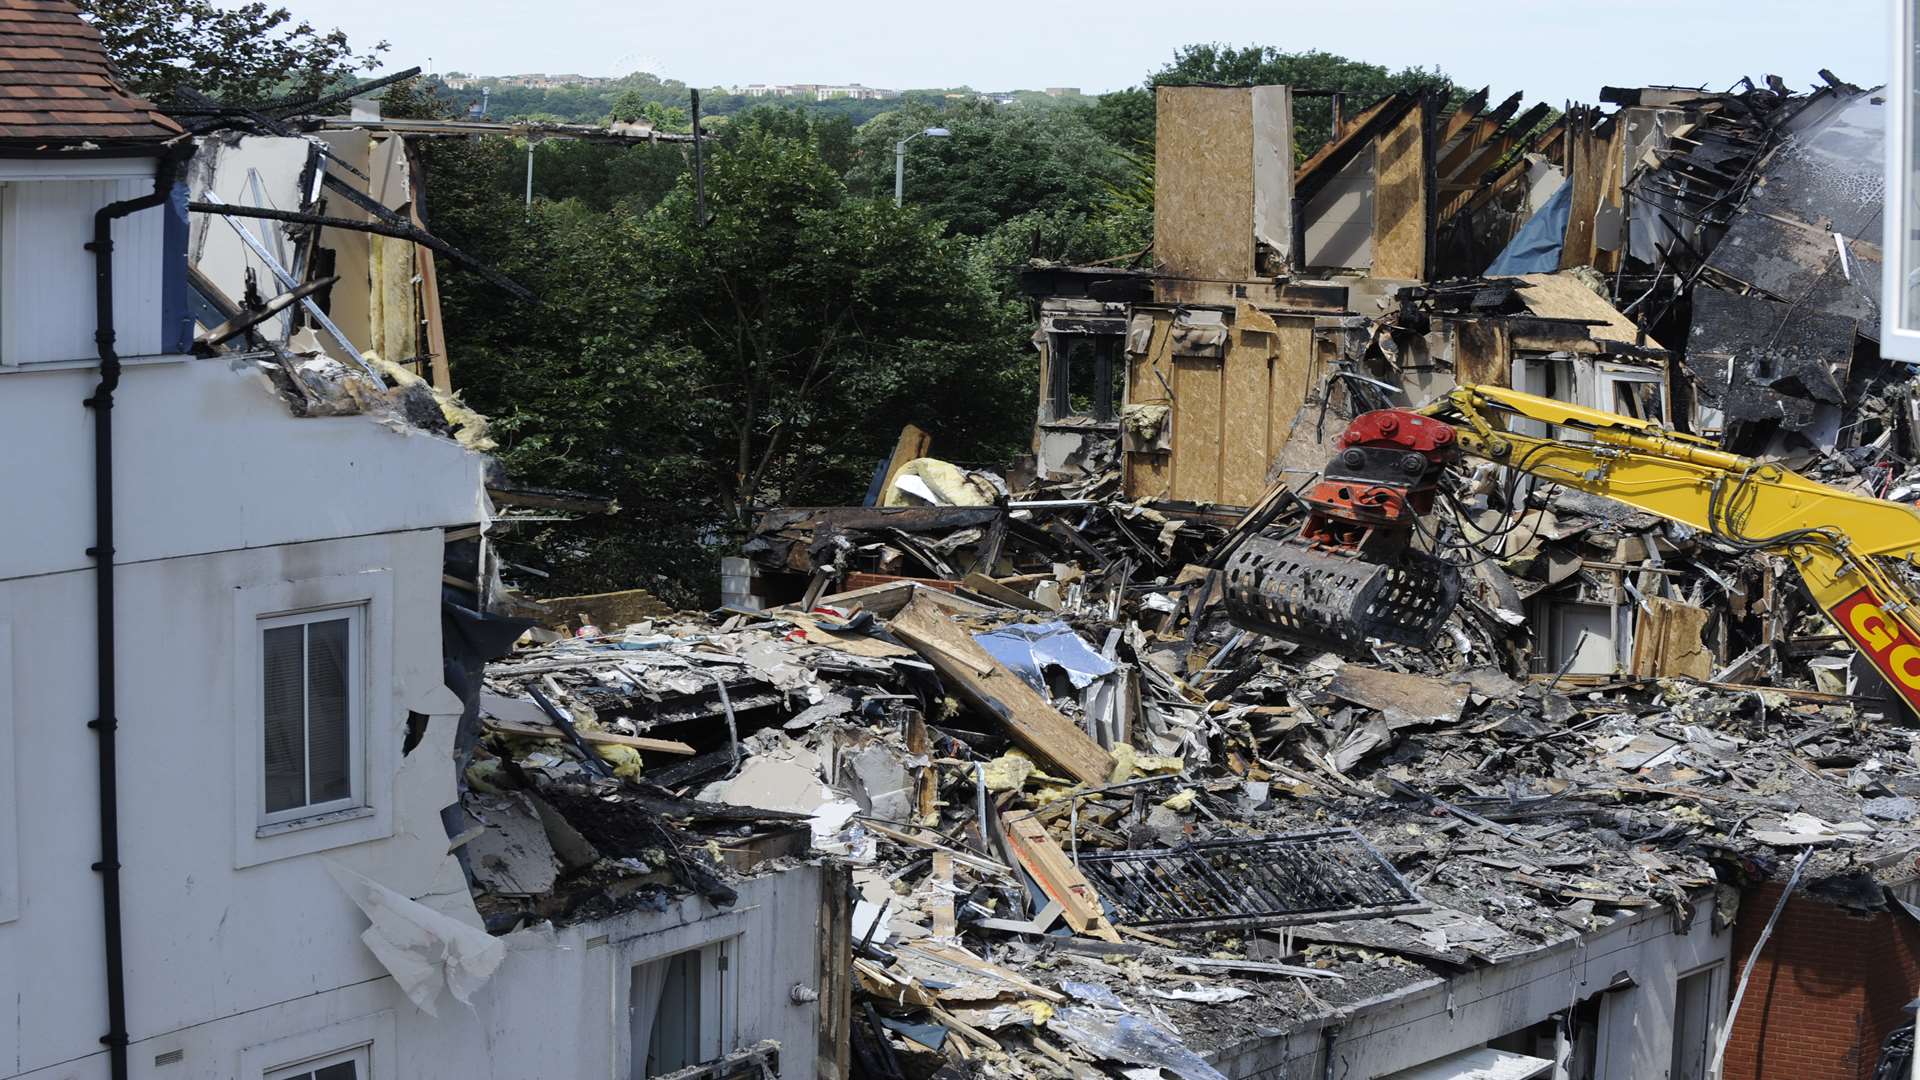 The damage after the Tannery fire in 2015